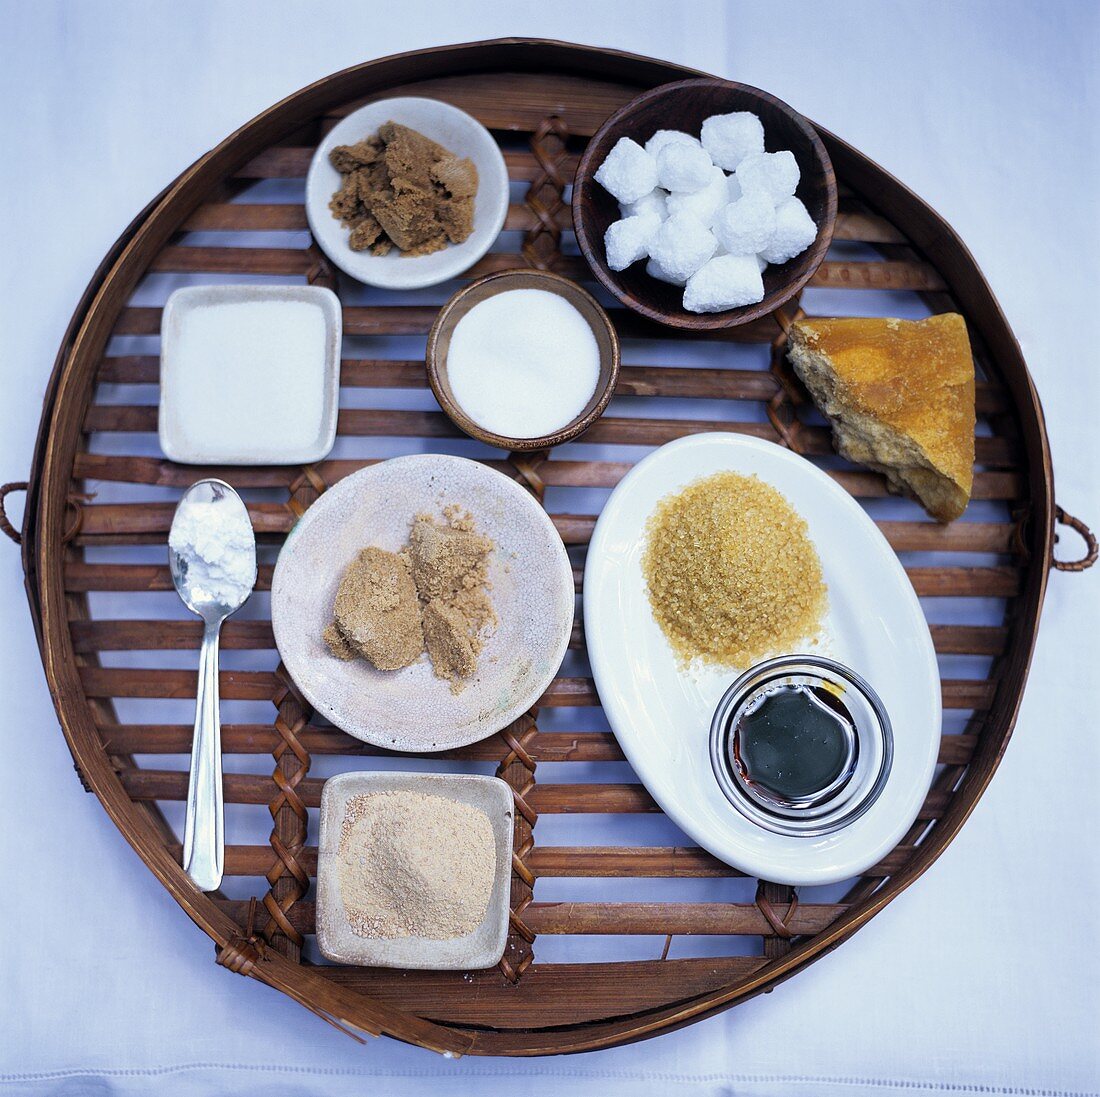 Still life with various sweeteners